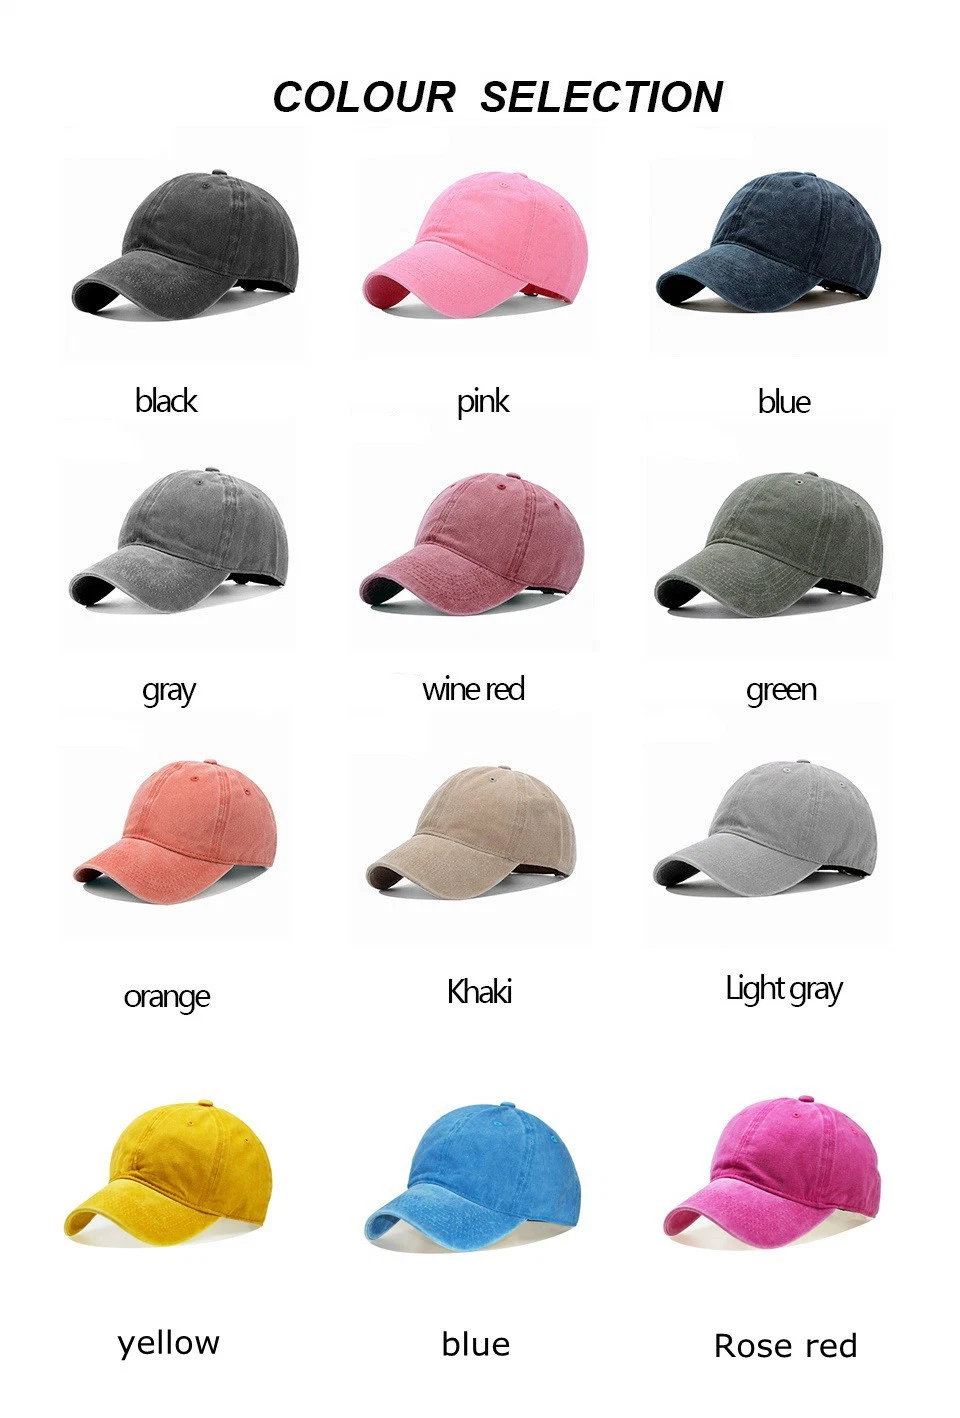 Lightweight Cotton Baseball Cap for Adults and Kids - Solid Color